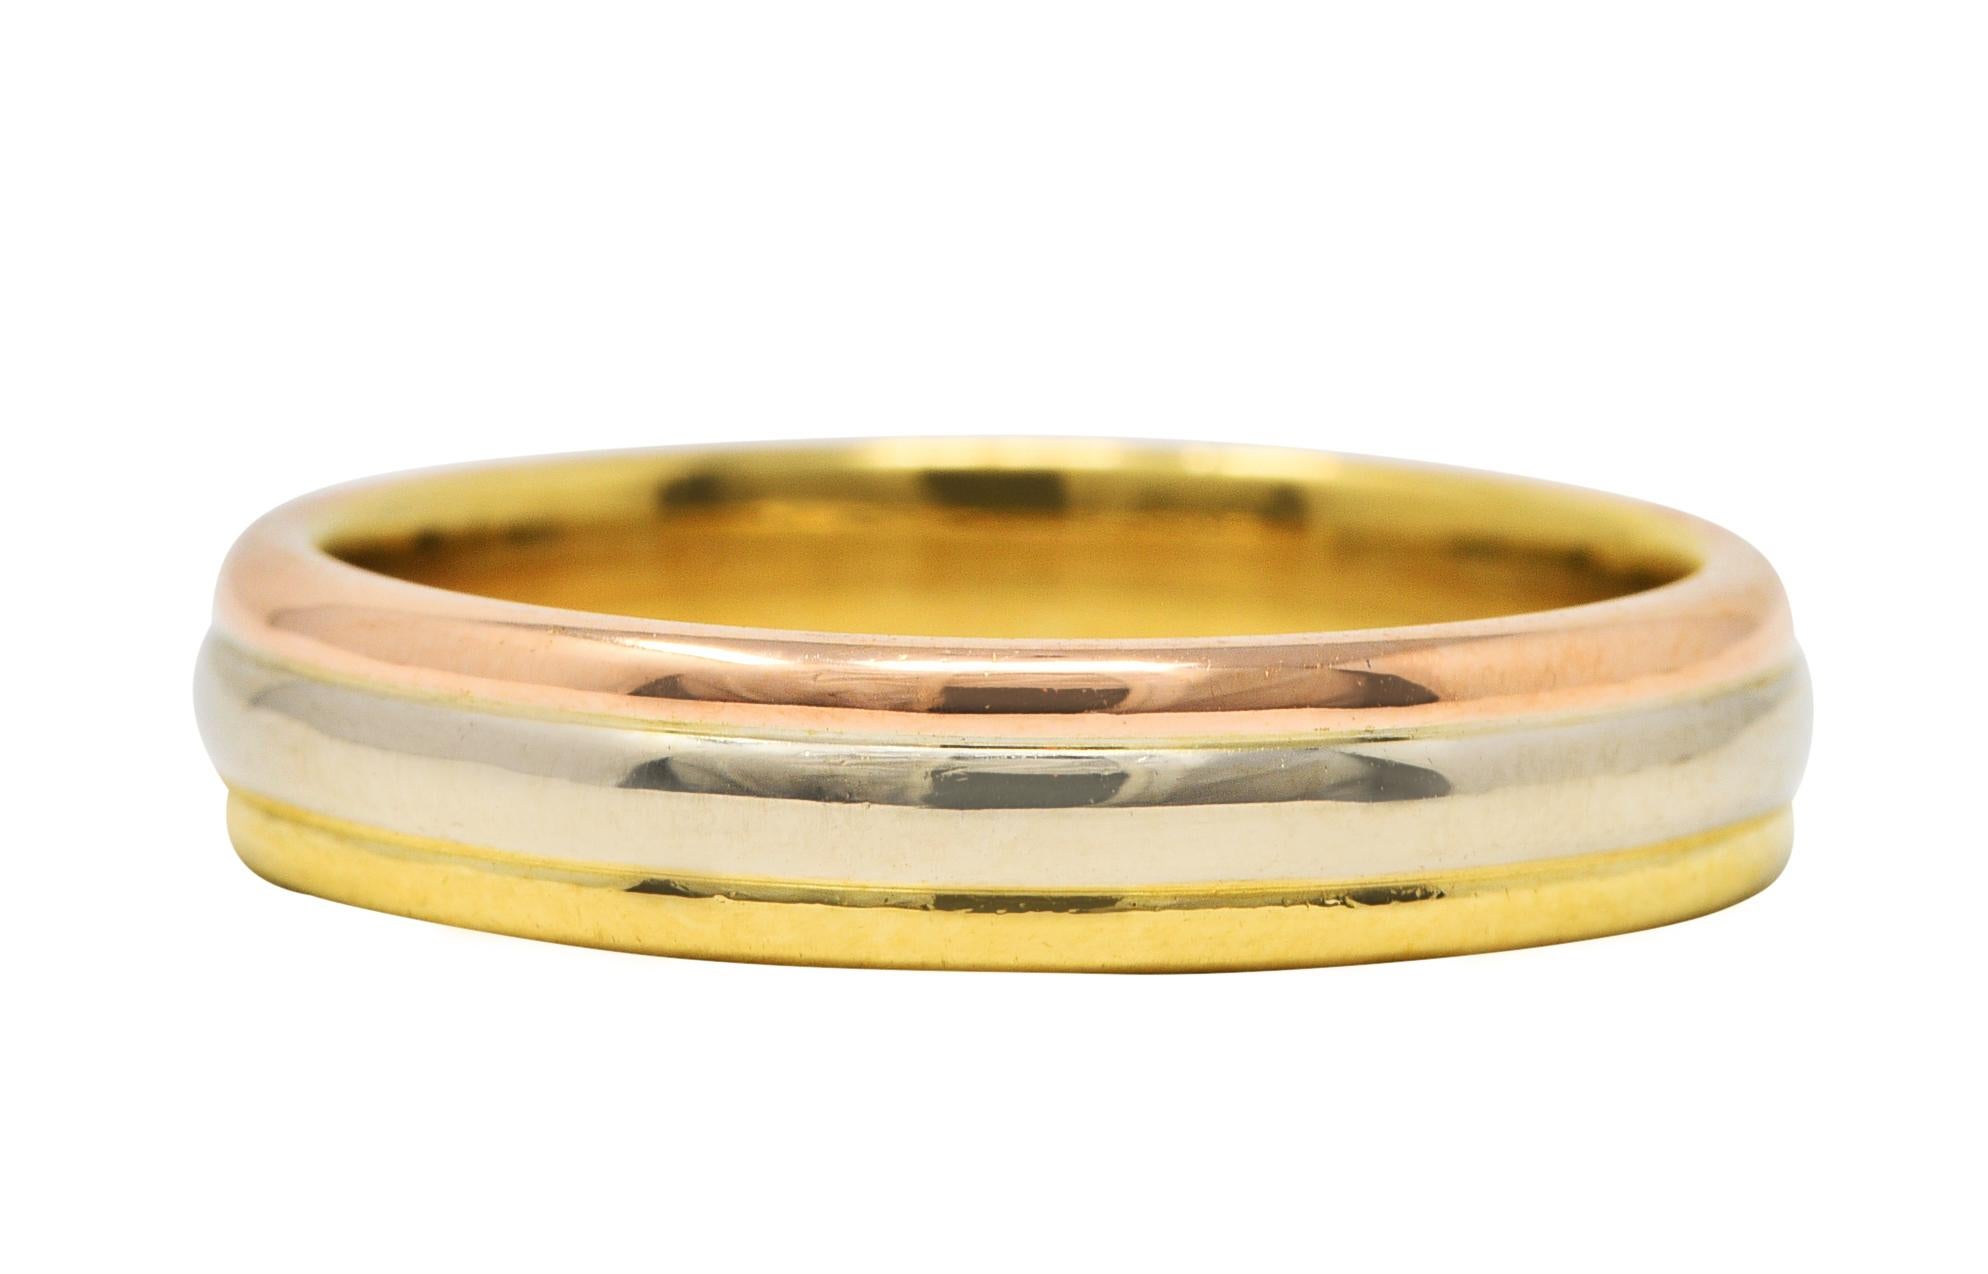 Band style ring comprised of three horizontal sections of yellow, white, and rose gold

With a high polished finish and rounded curvature for each section

Stamped 1996 and from the Trinity collection

Fully signed Cartier and numbered

Stamped 750